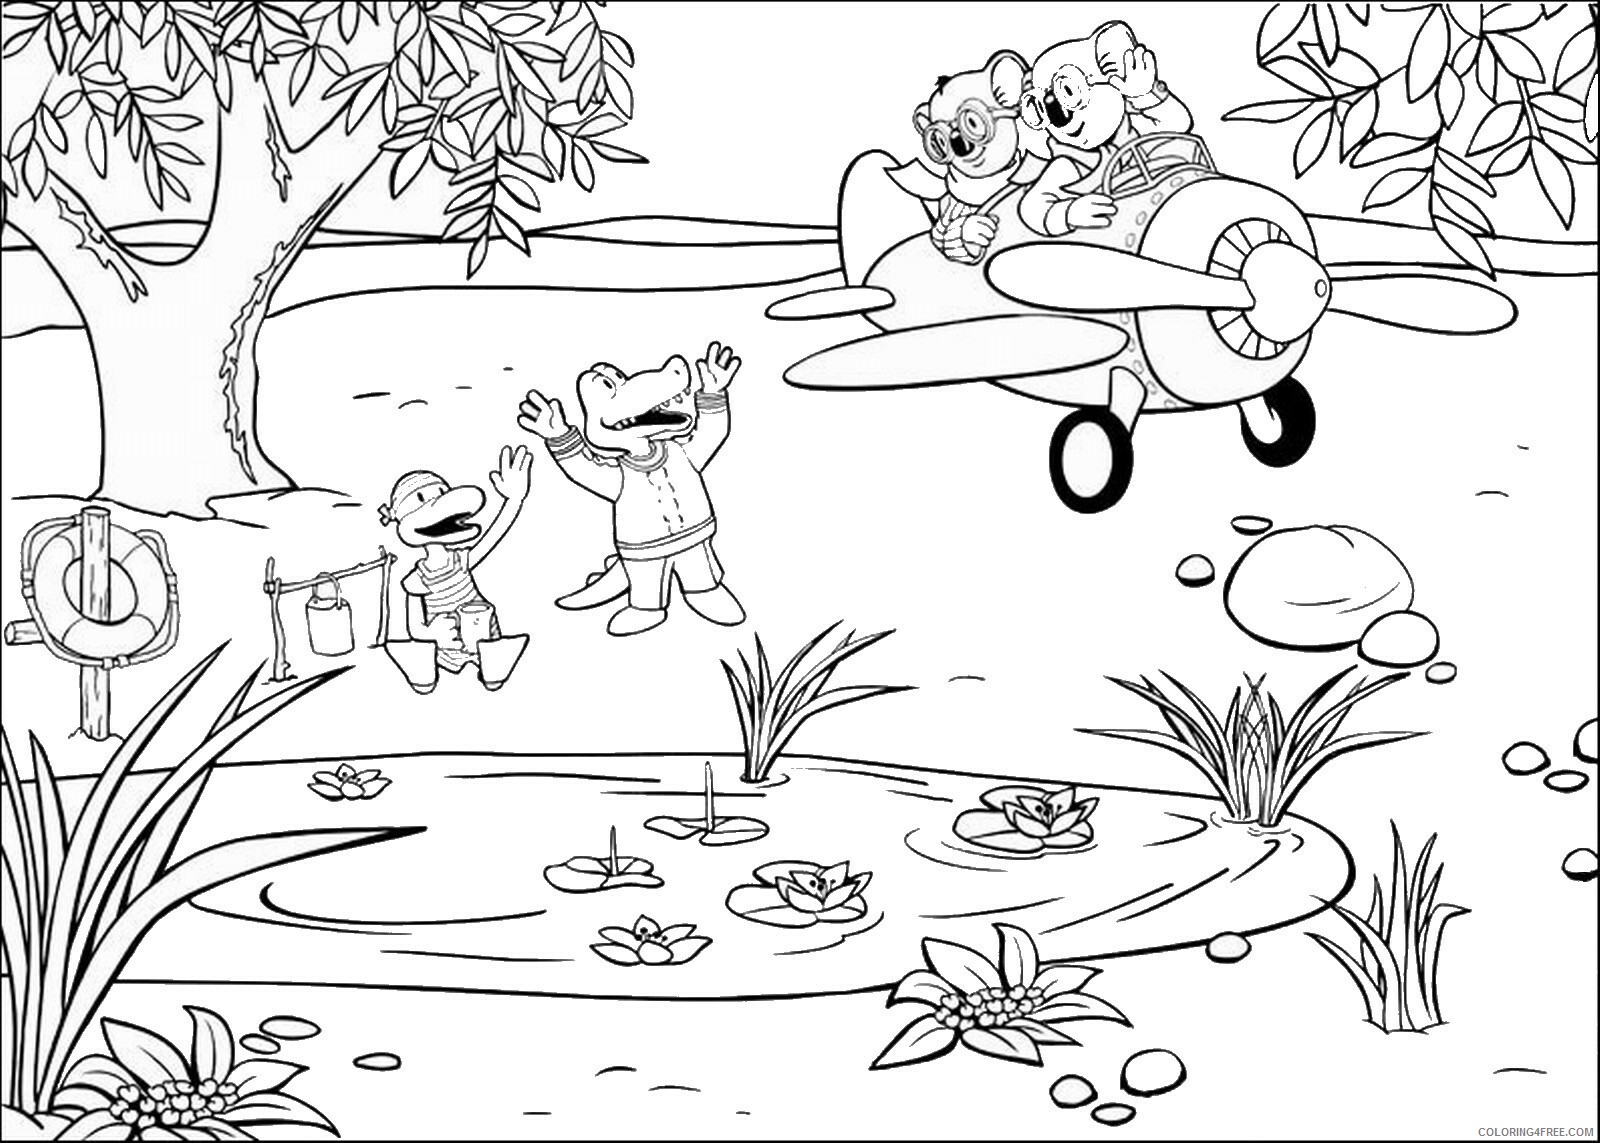 The Koala Brothers Coloring Pages TV Film Koala_Brothers_11 Printable 2020 09005 Coloring4free